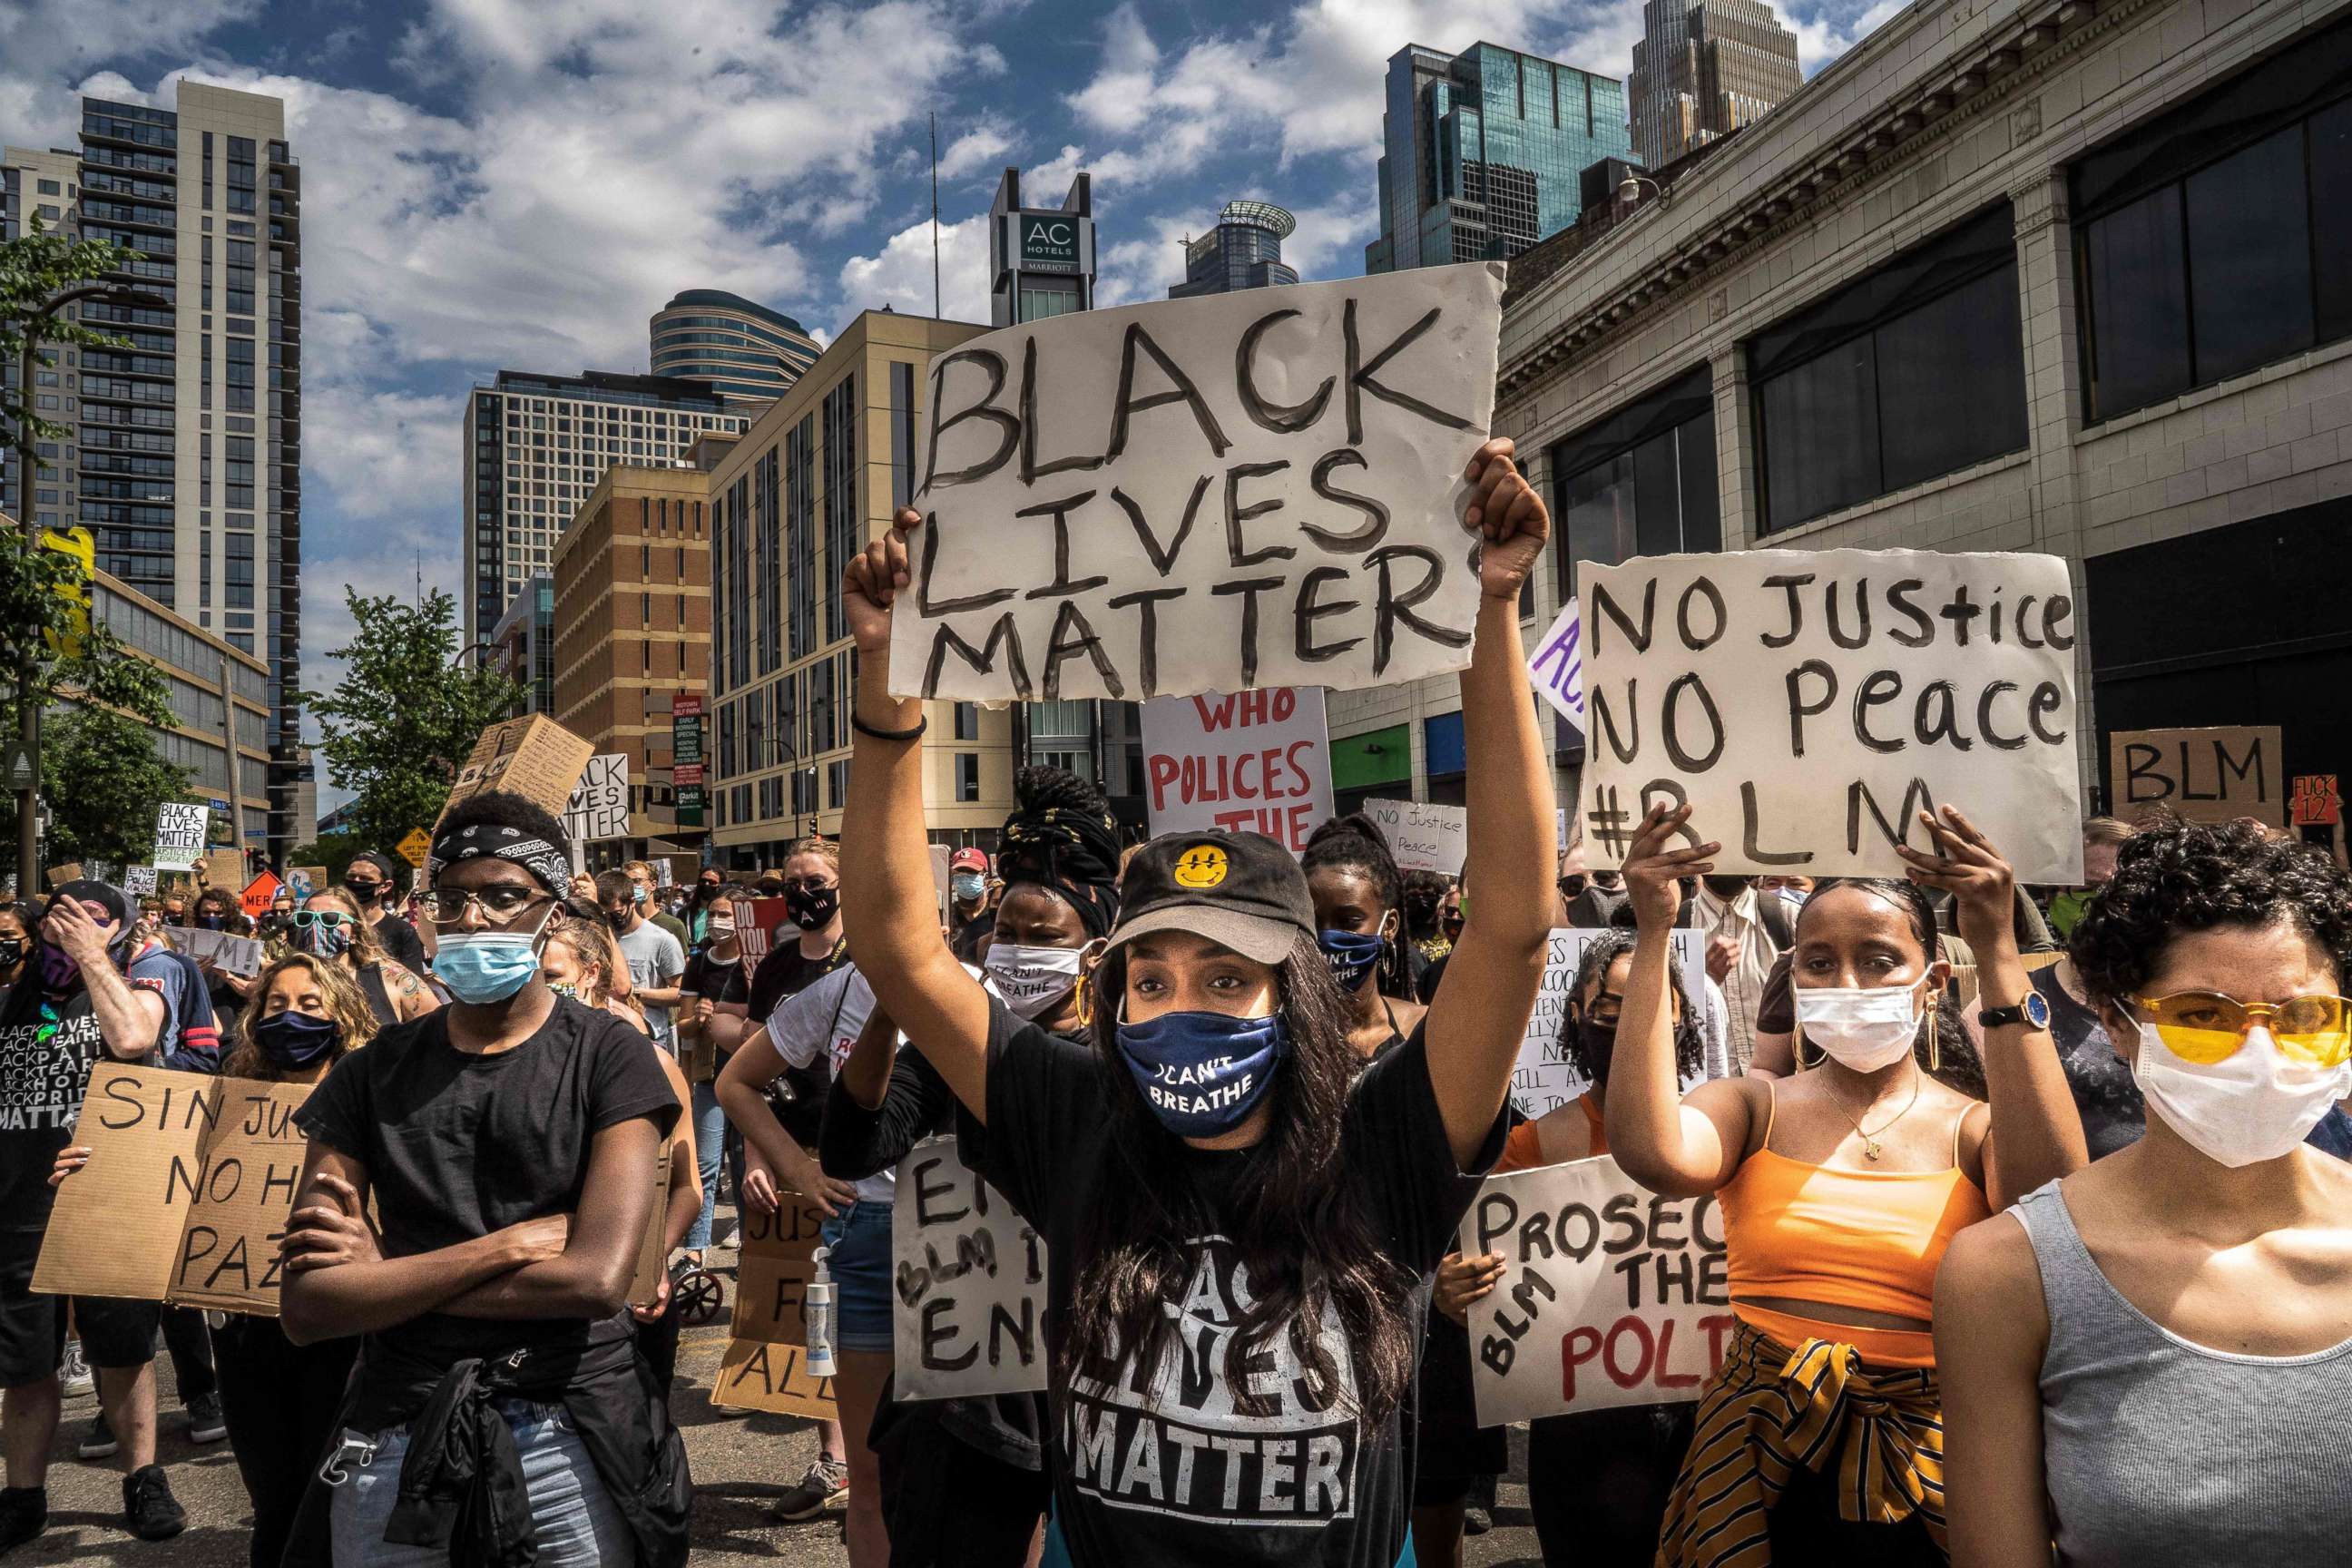 PHOTO: Protesters hold signs outside the Minneapolis 1st Police precinct during a demonstration against police brutality and racism on June 13, 2020 in Minneapolis, Minnesota.